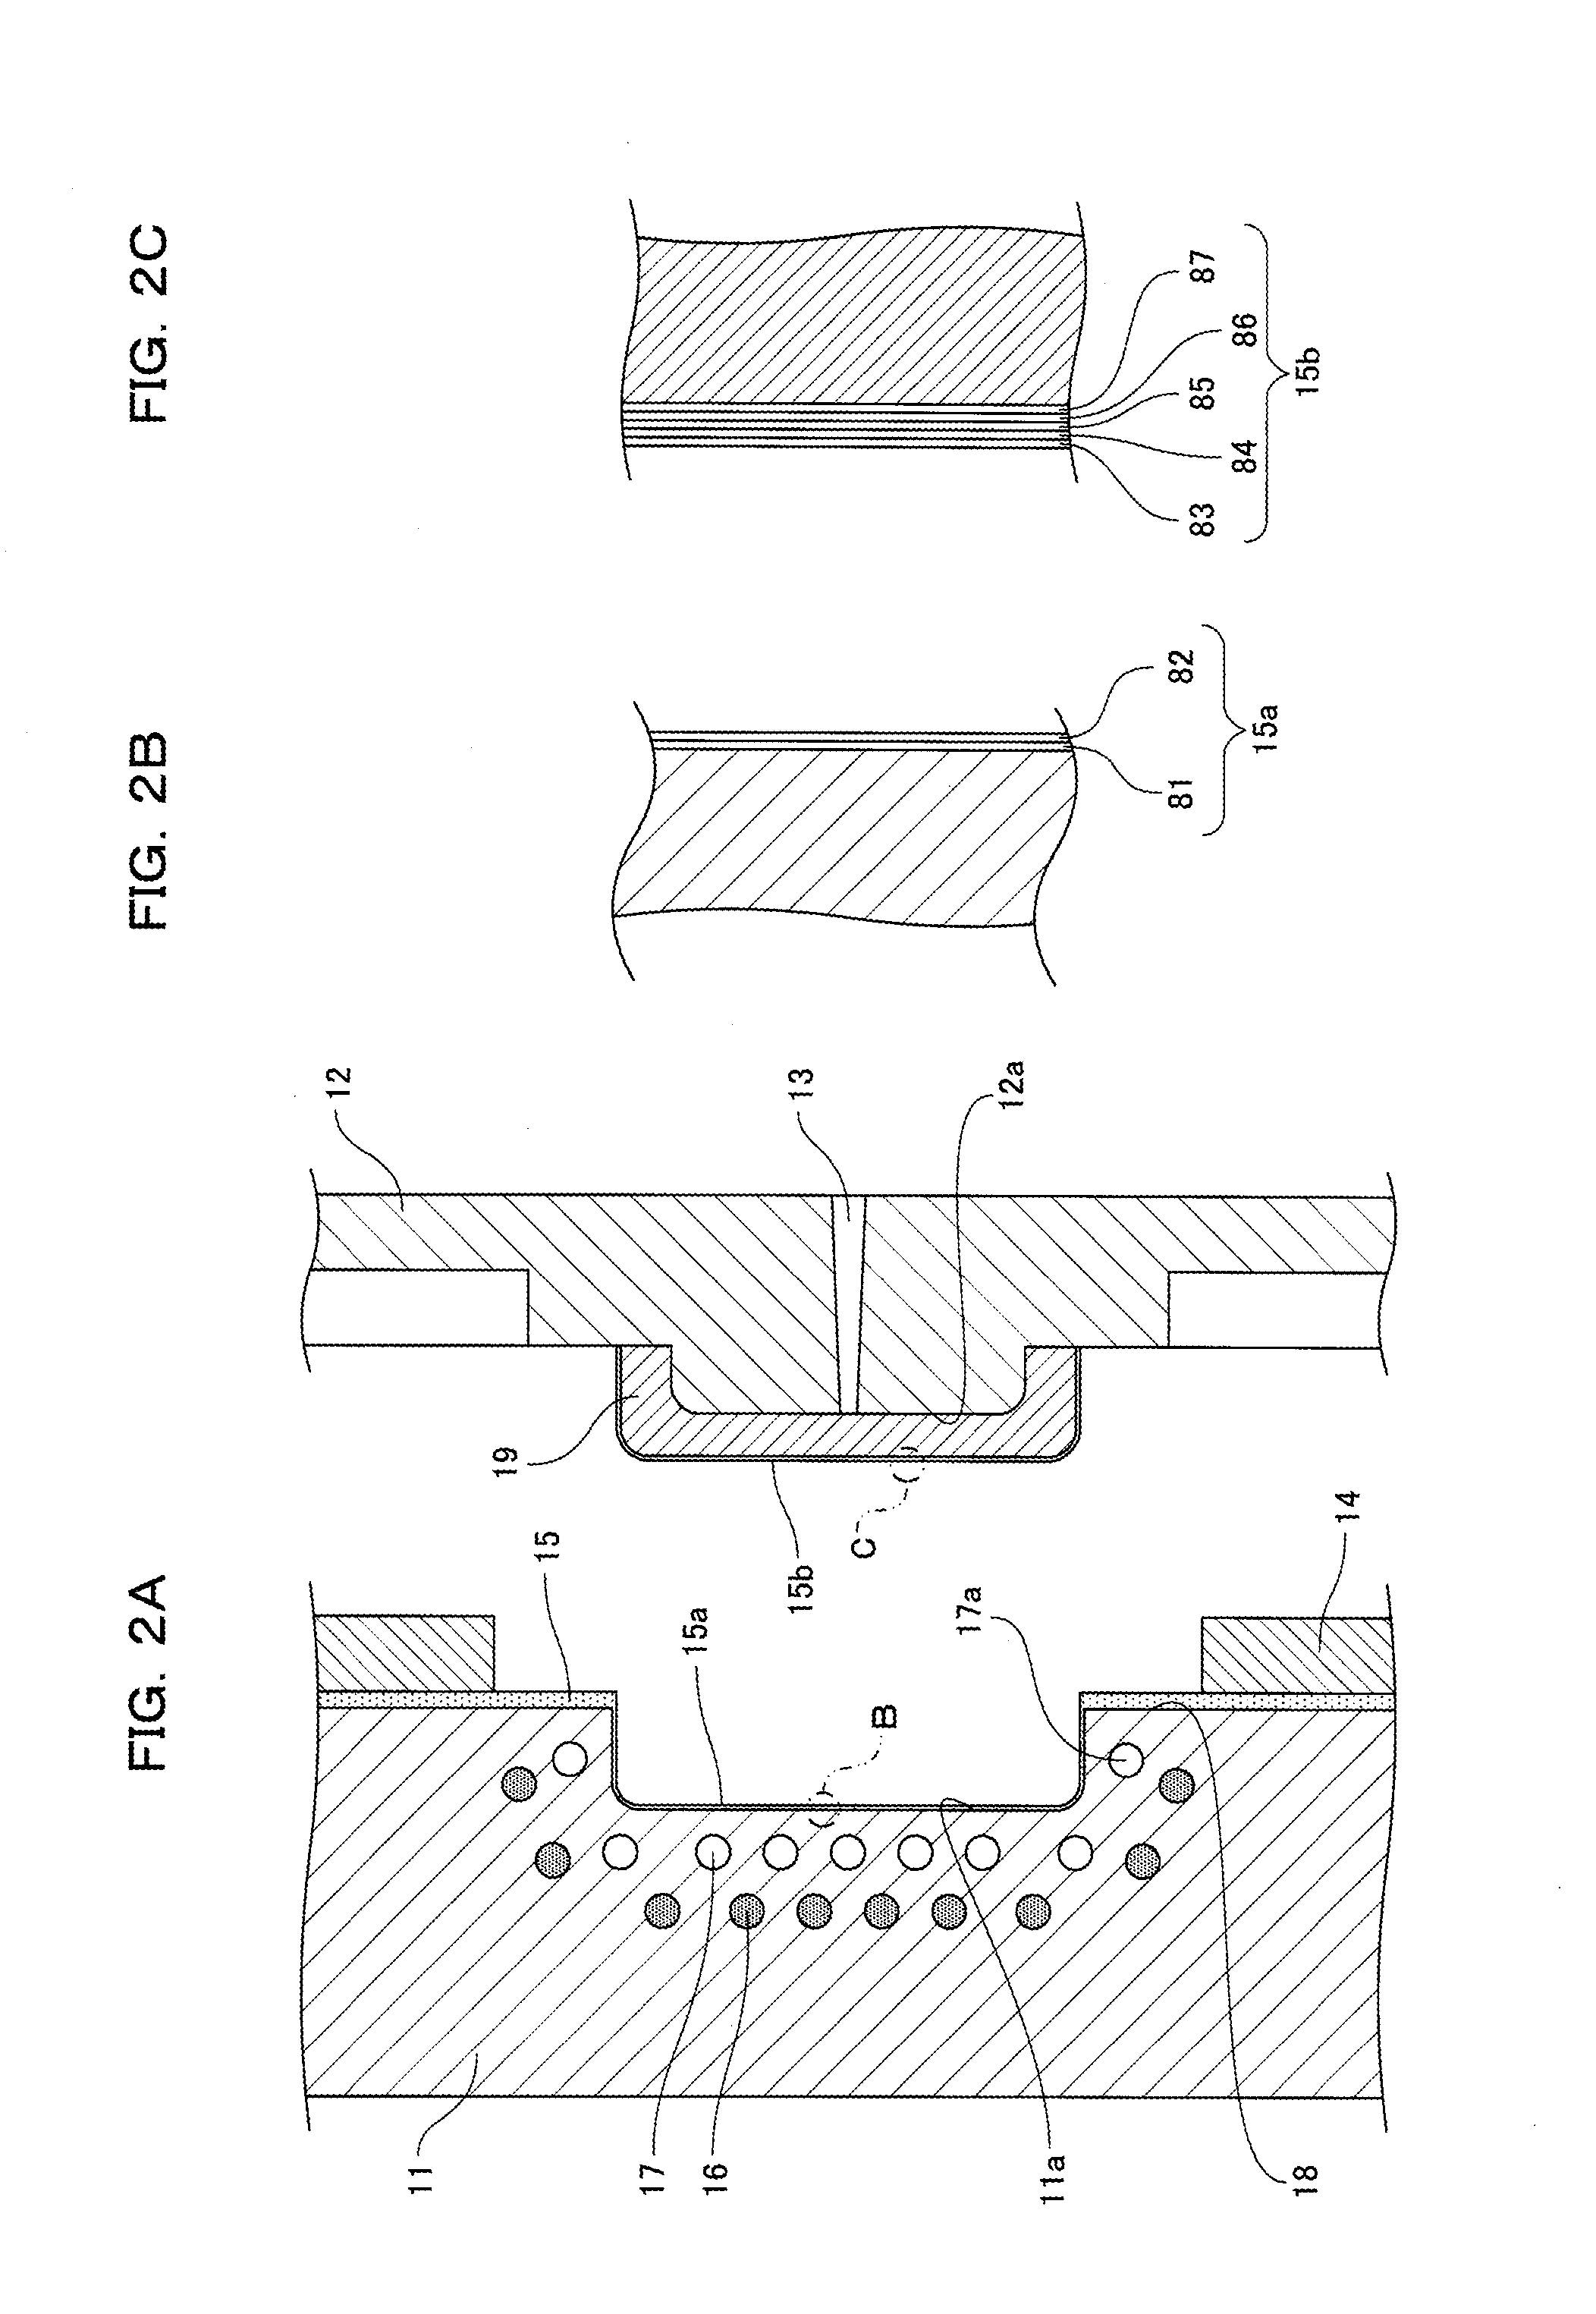 Injection molding method and injection mold assembly